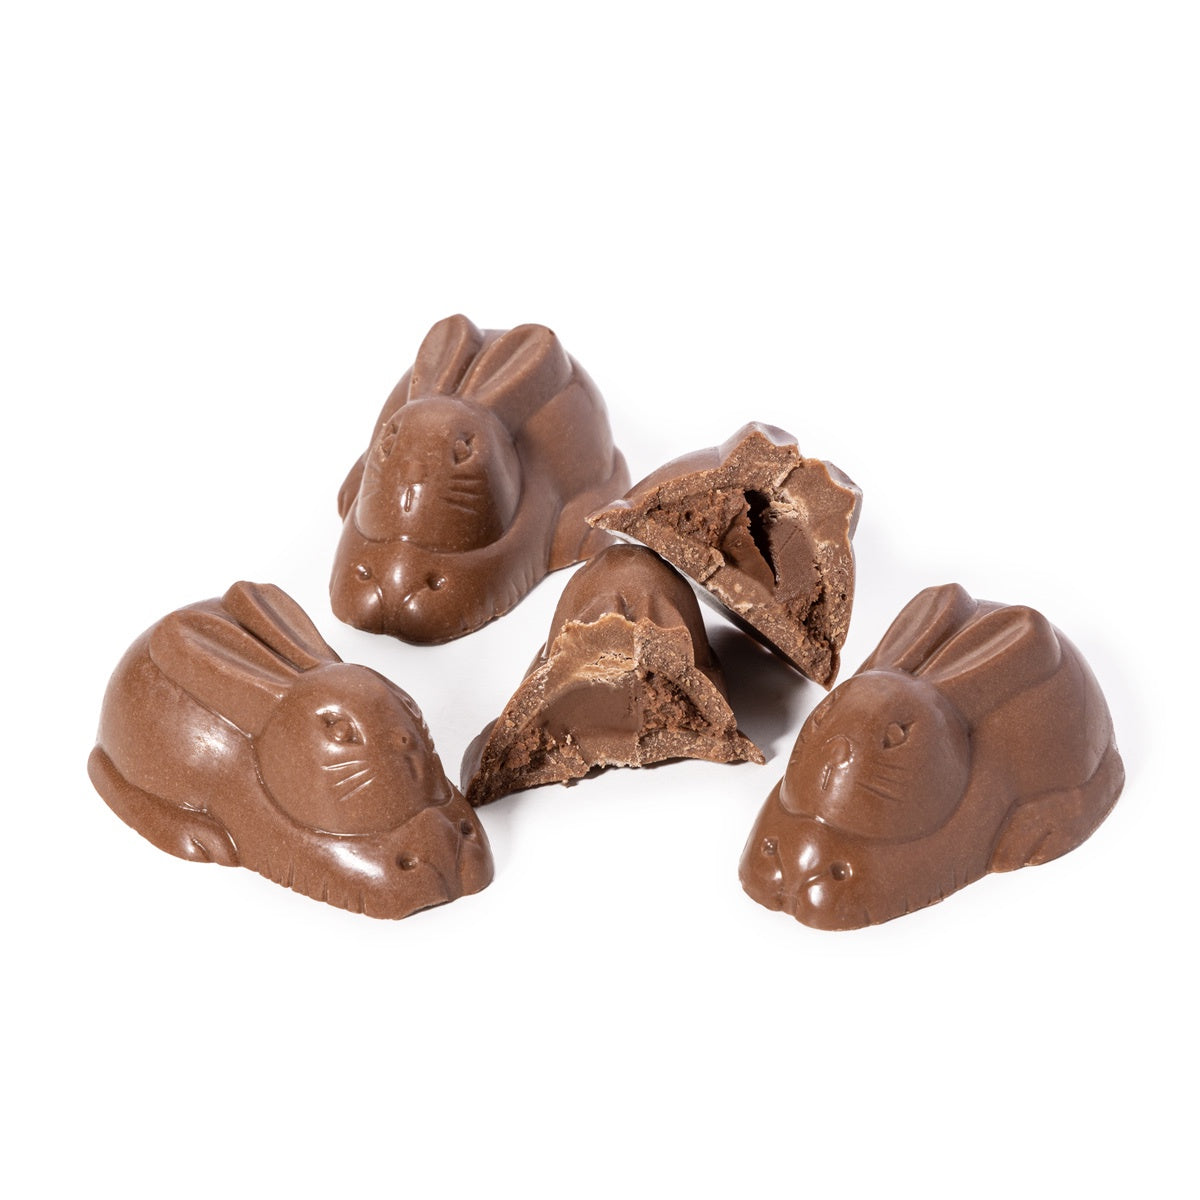 Charlotte Piper Nutella Filled Bunnies 4 pack